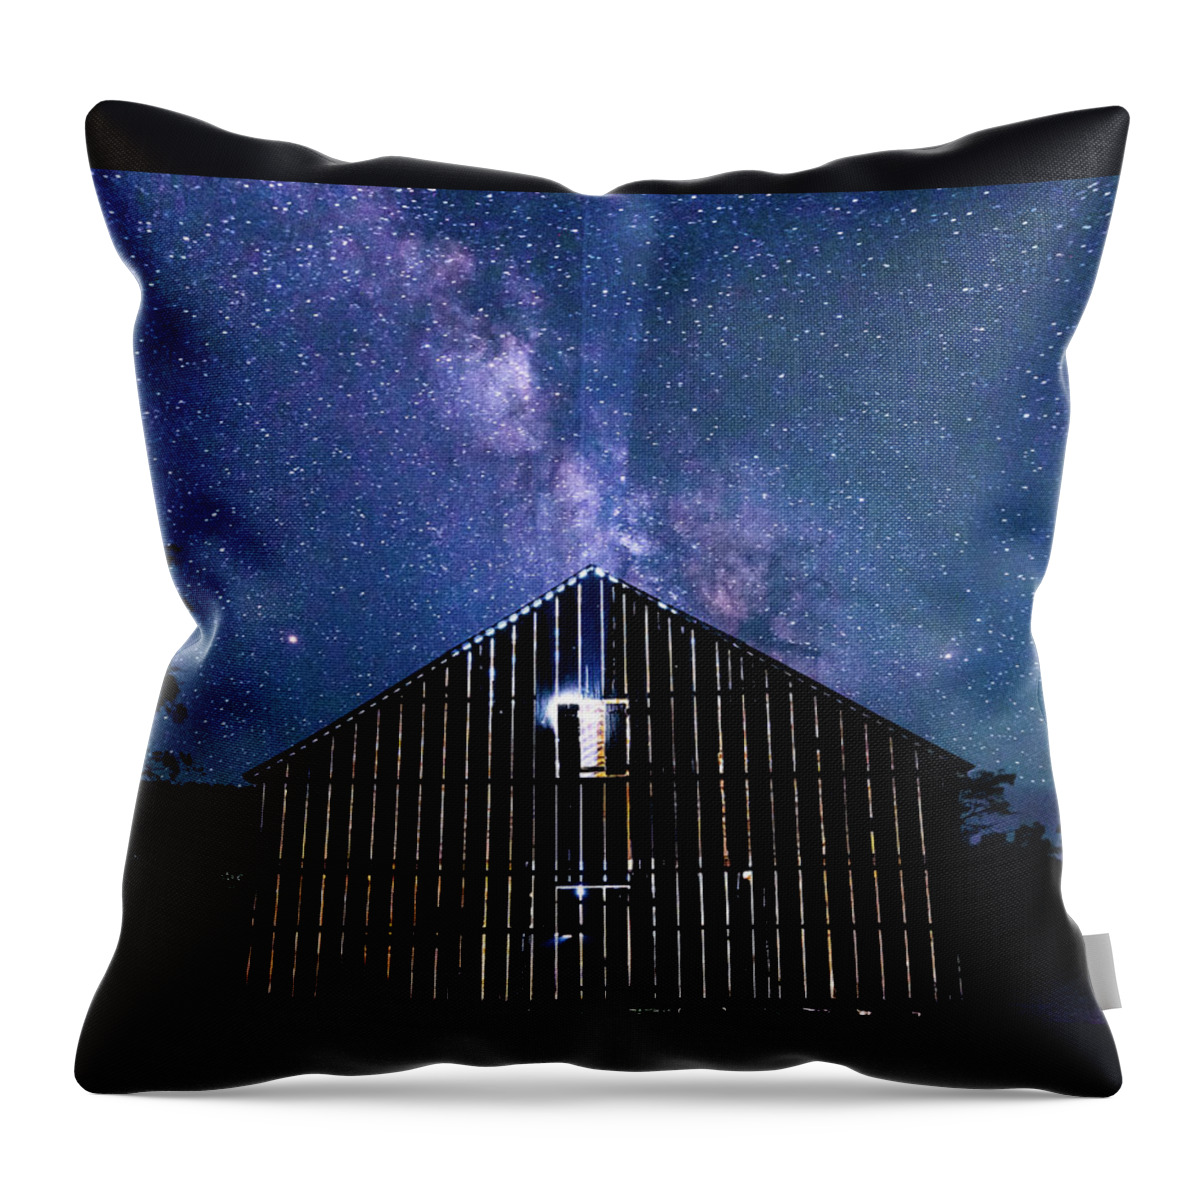 2018 Throw Pillow featuring the photograph Barn Night Light by Erin K Images